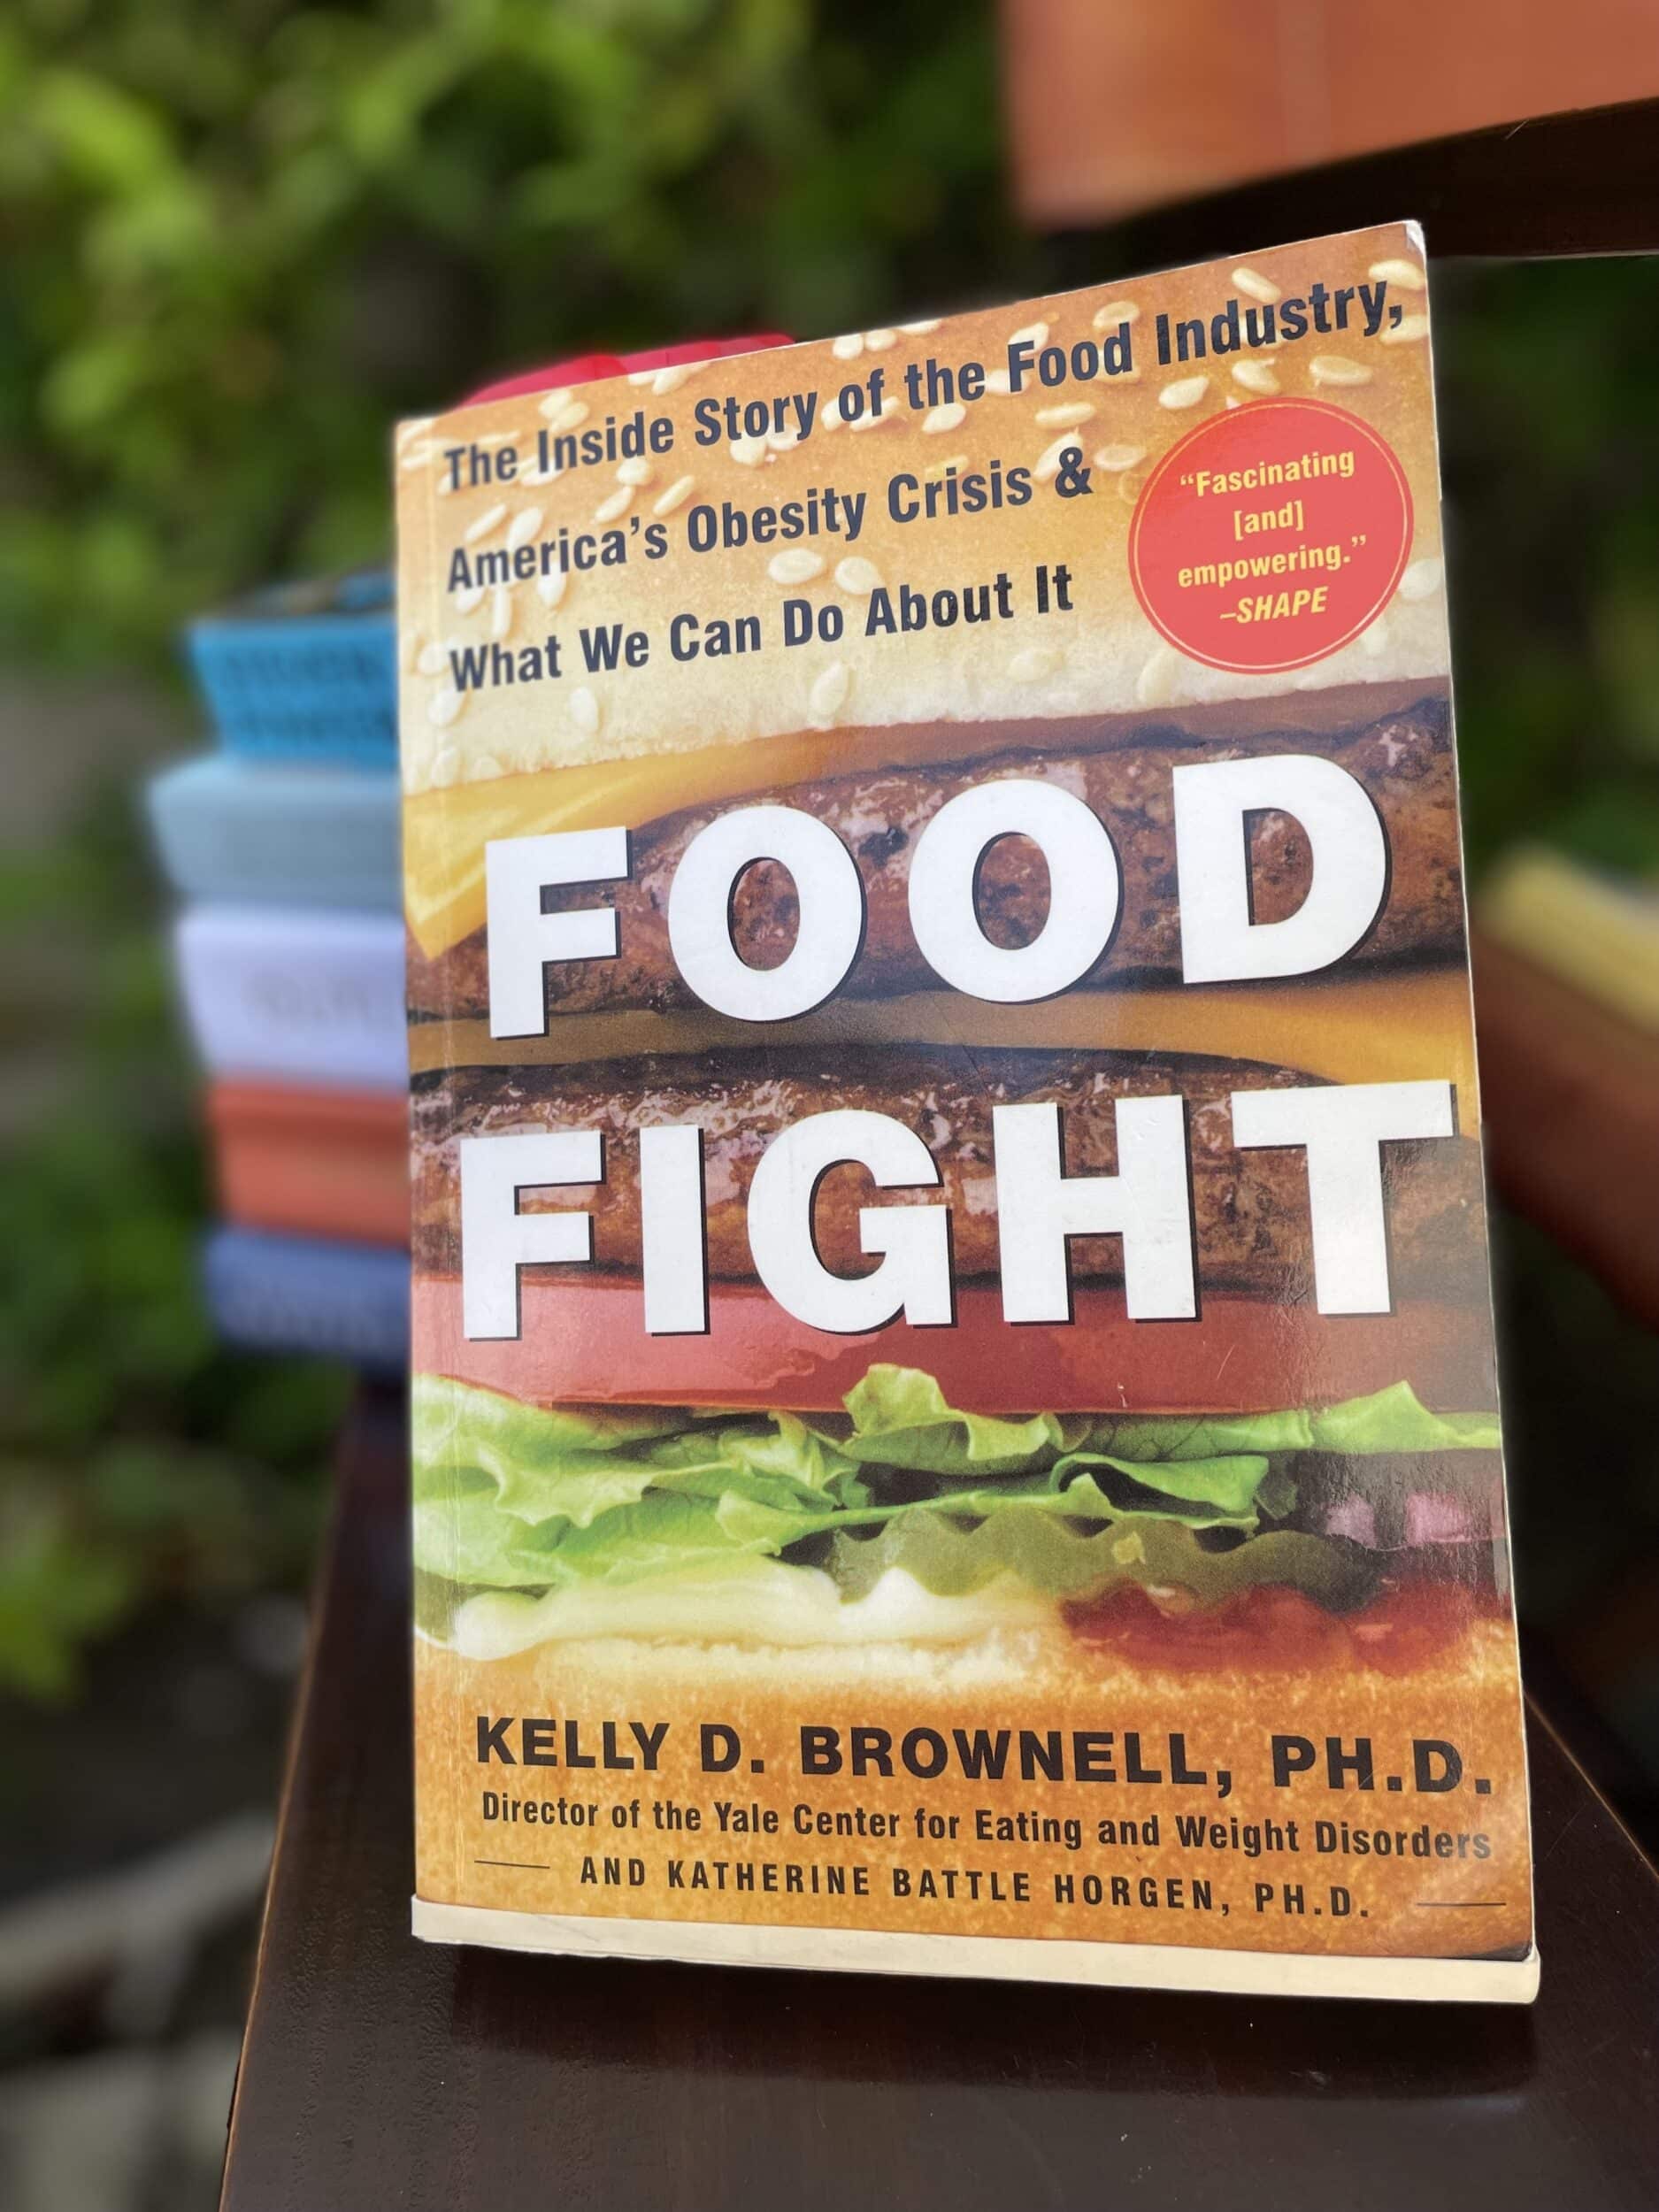 The Inside Story of the Food Industry, America's Obesity Crisis & What We Can Do About it.